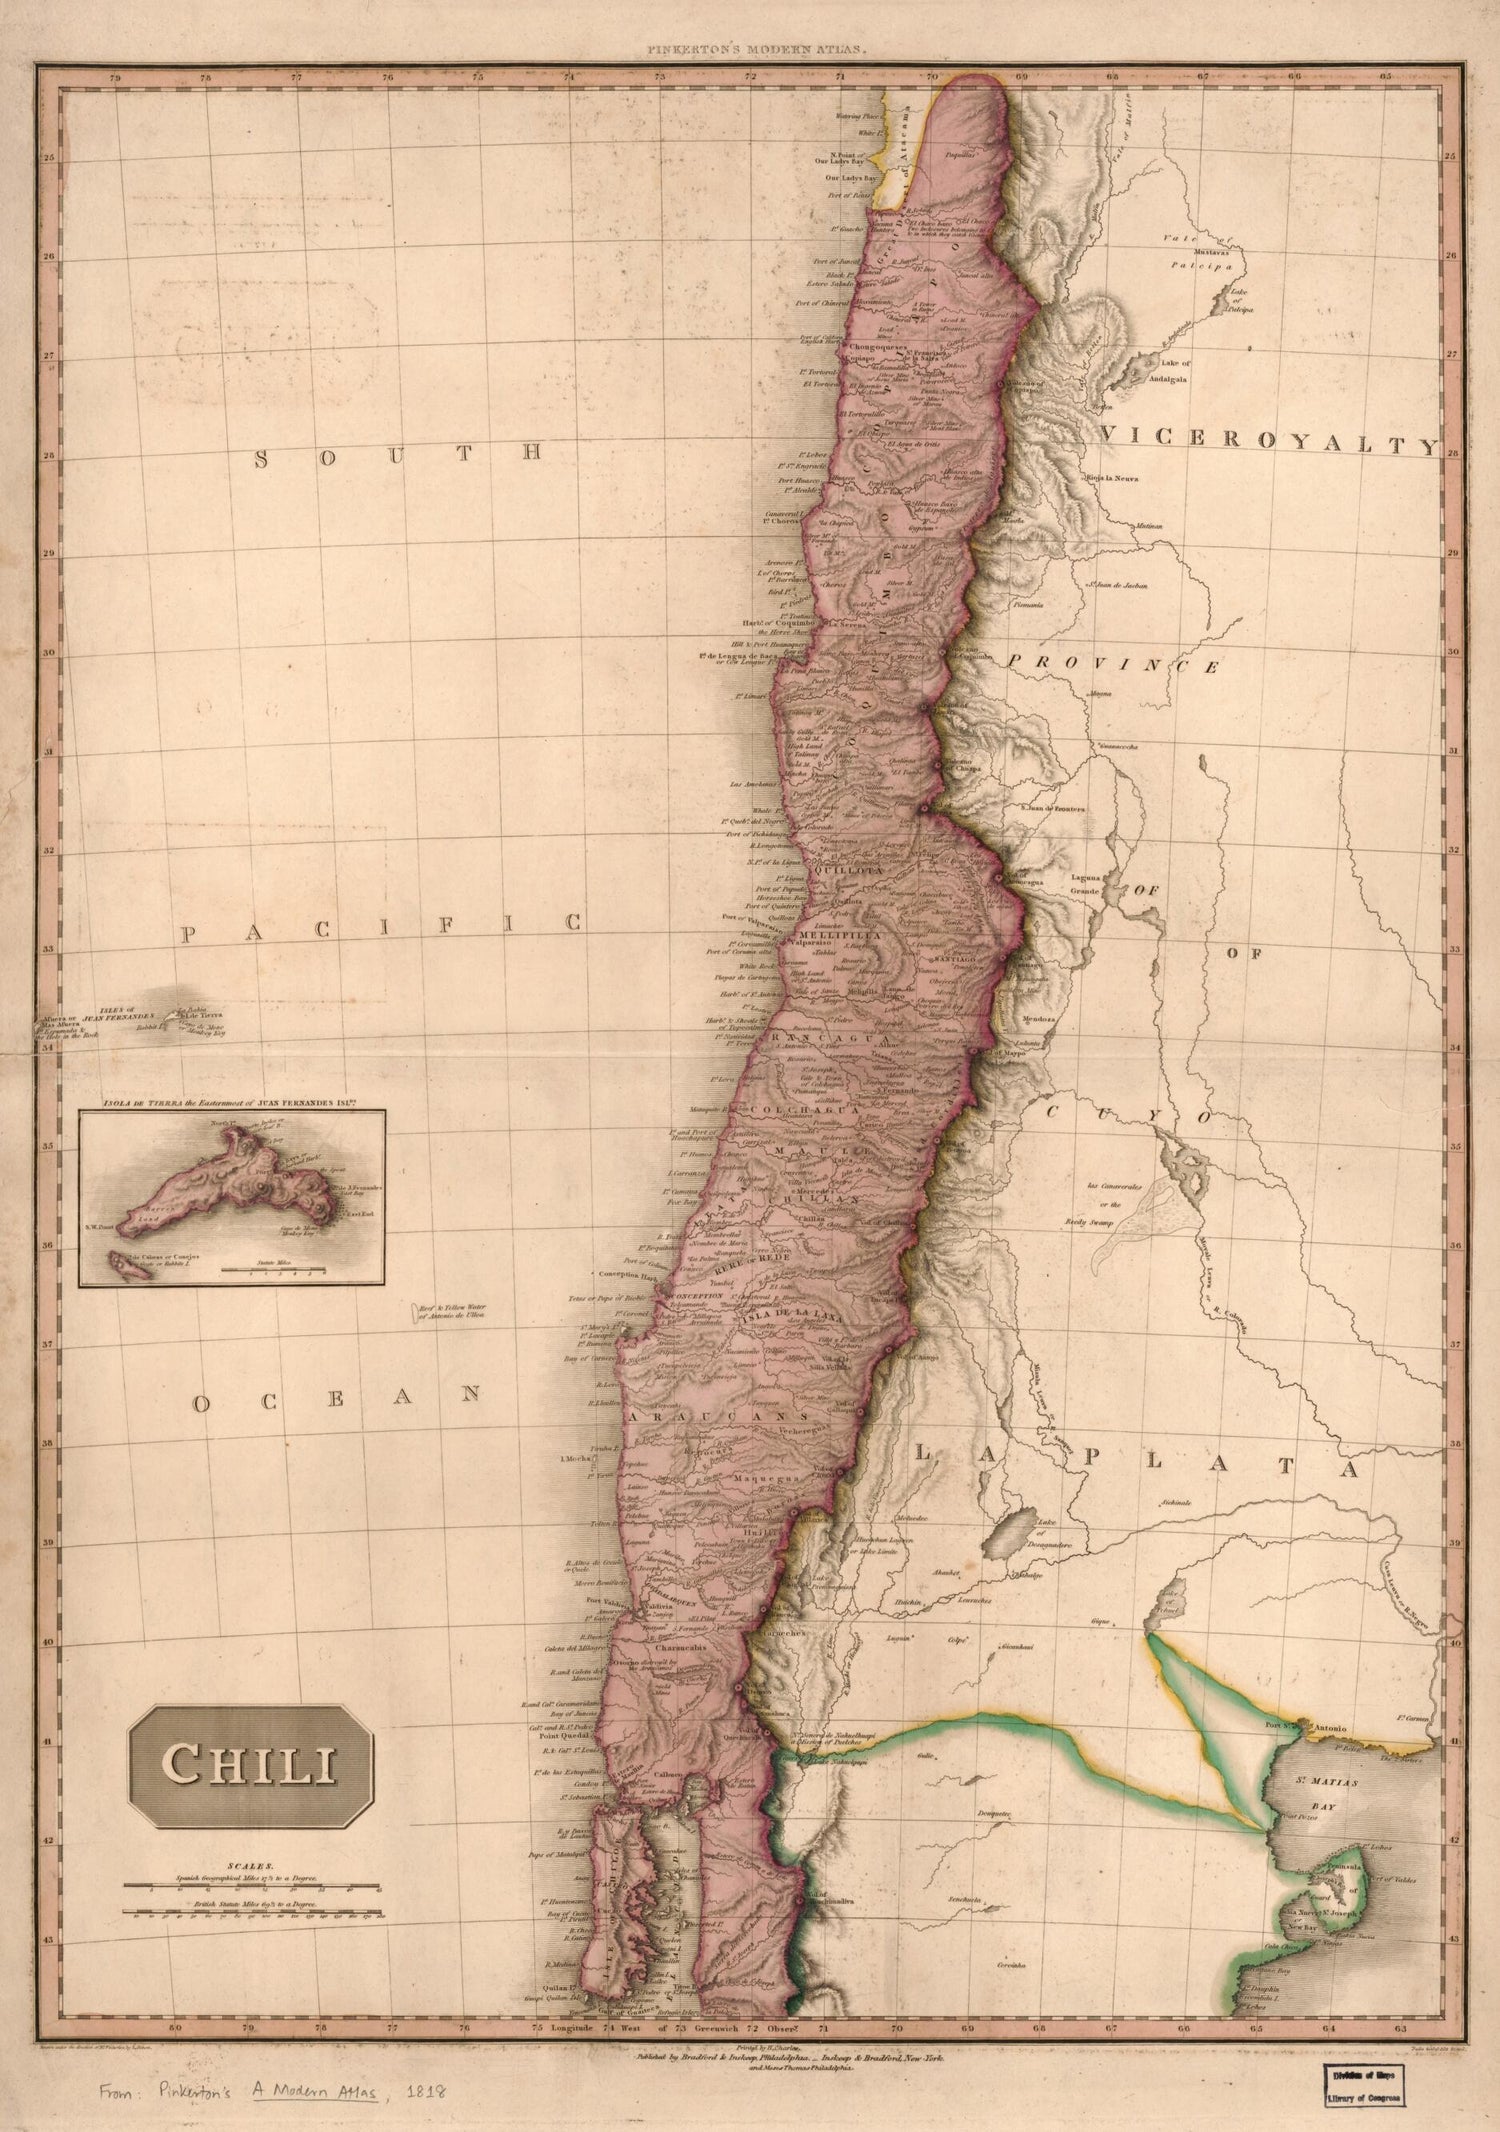 This old map of Chile from 1818 was created by  Bradford and Inskeep, L. Hebert,  Inskeep and Bradford, Samuel John Neele, John Pinkerton in 1818